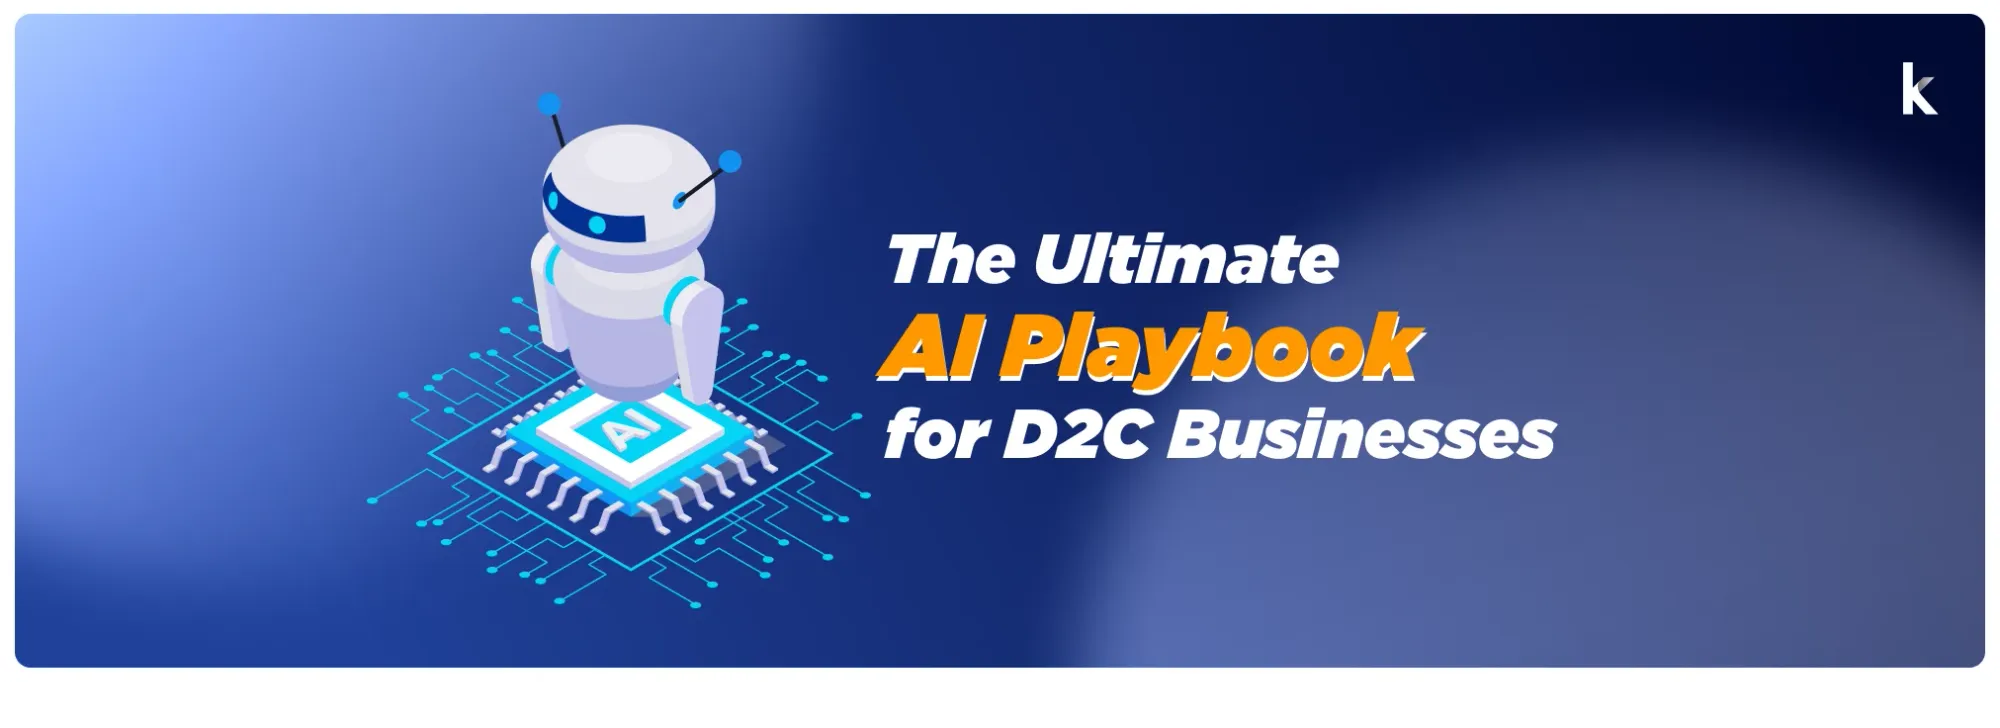 The Future of D2C in India: How AI is shaping the customer journey